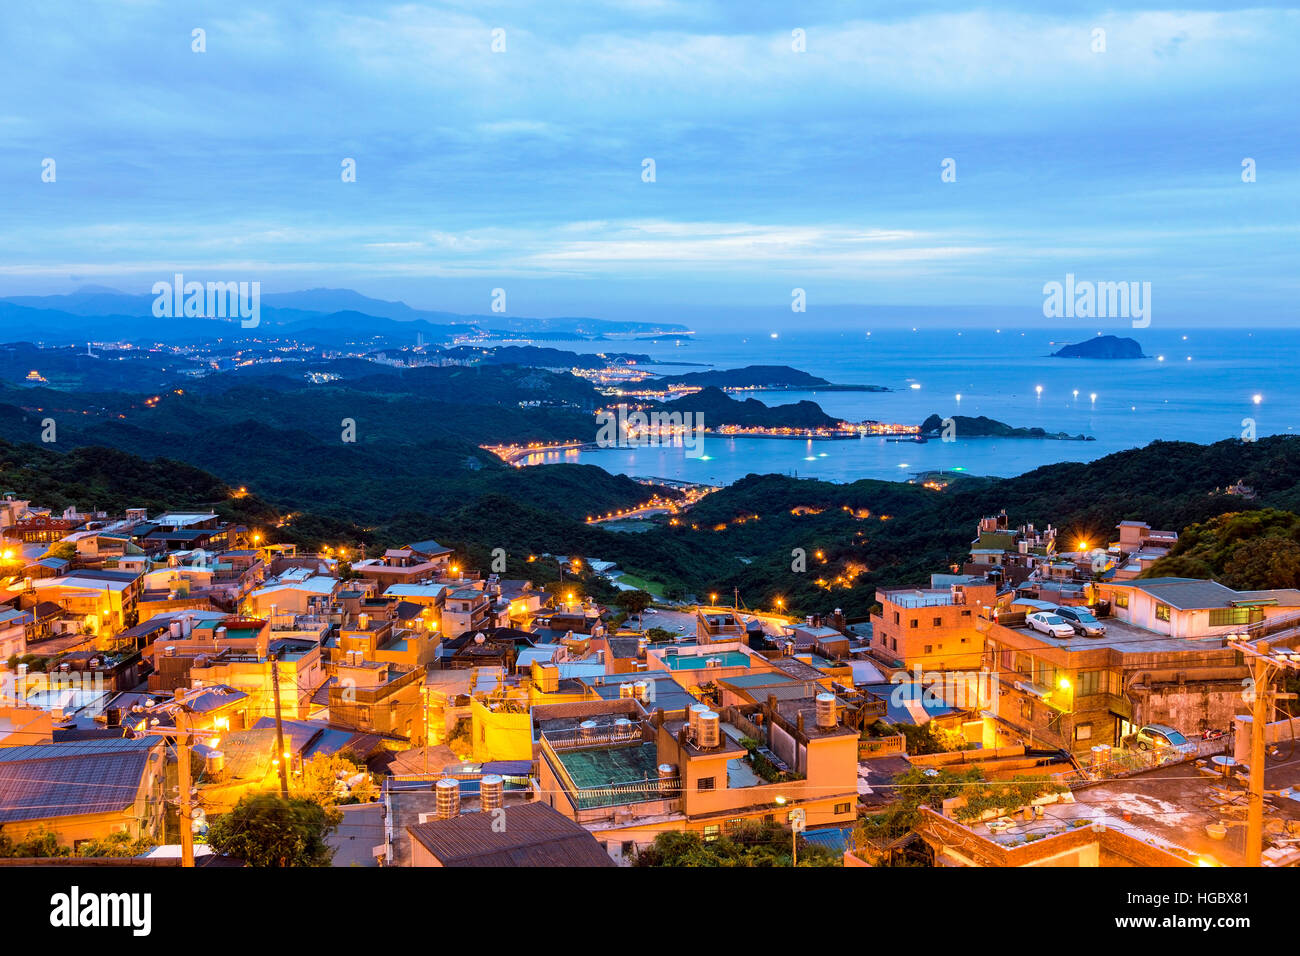 Houses and hills at night in Jiufen Taiwan Stock Photo